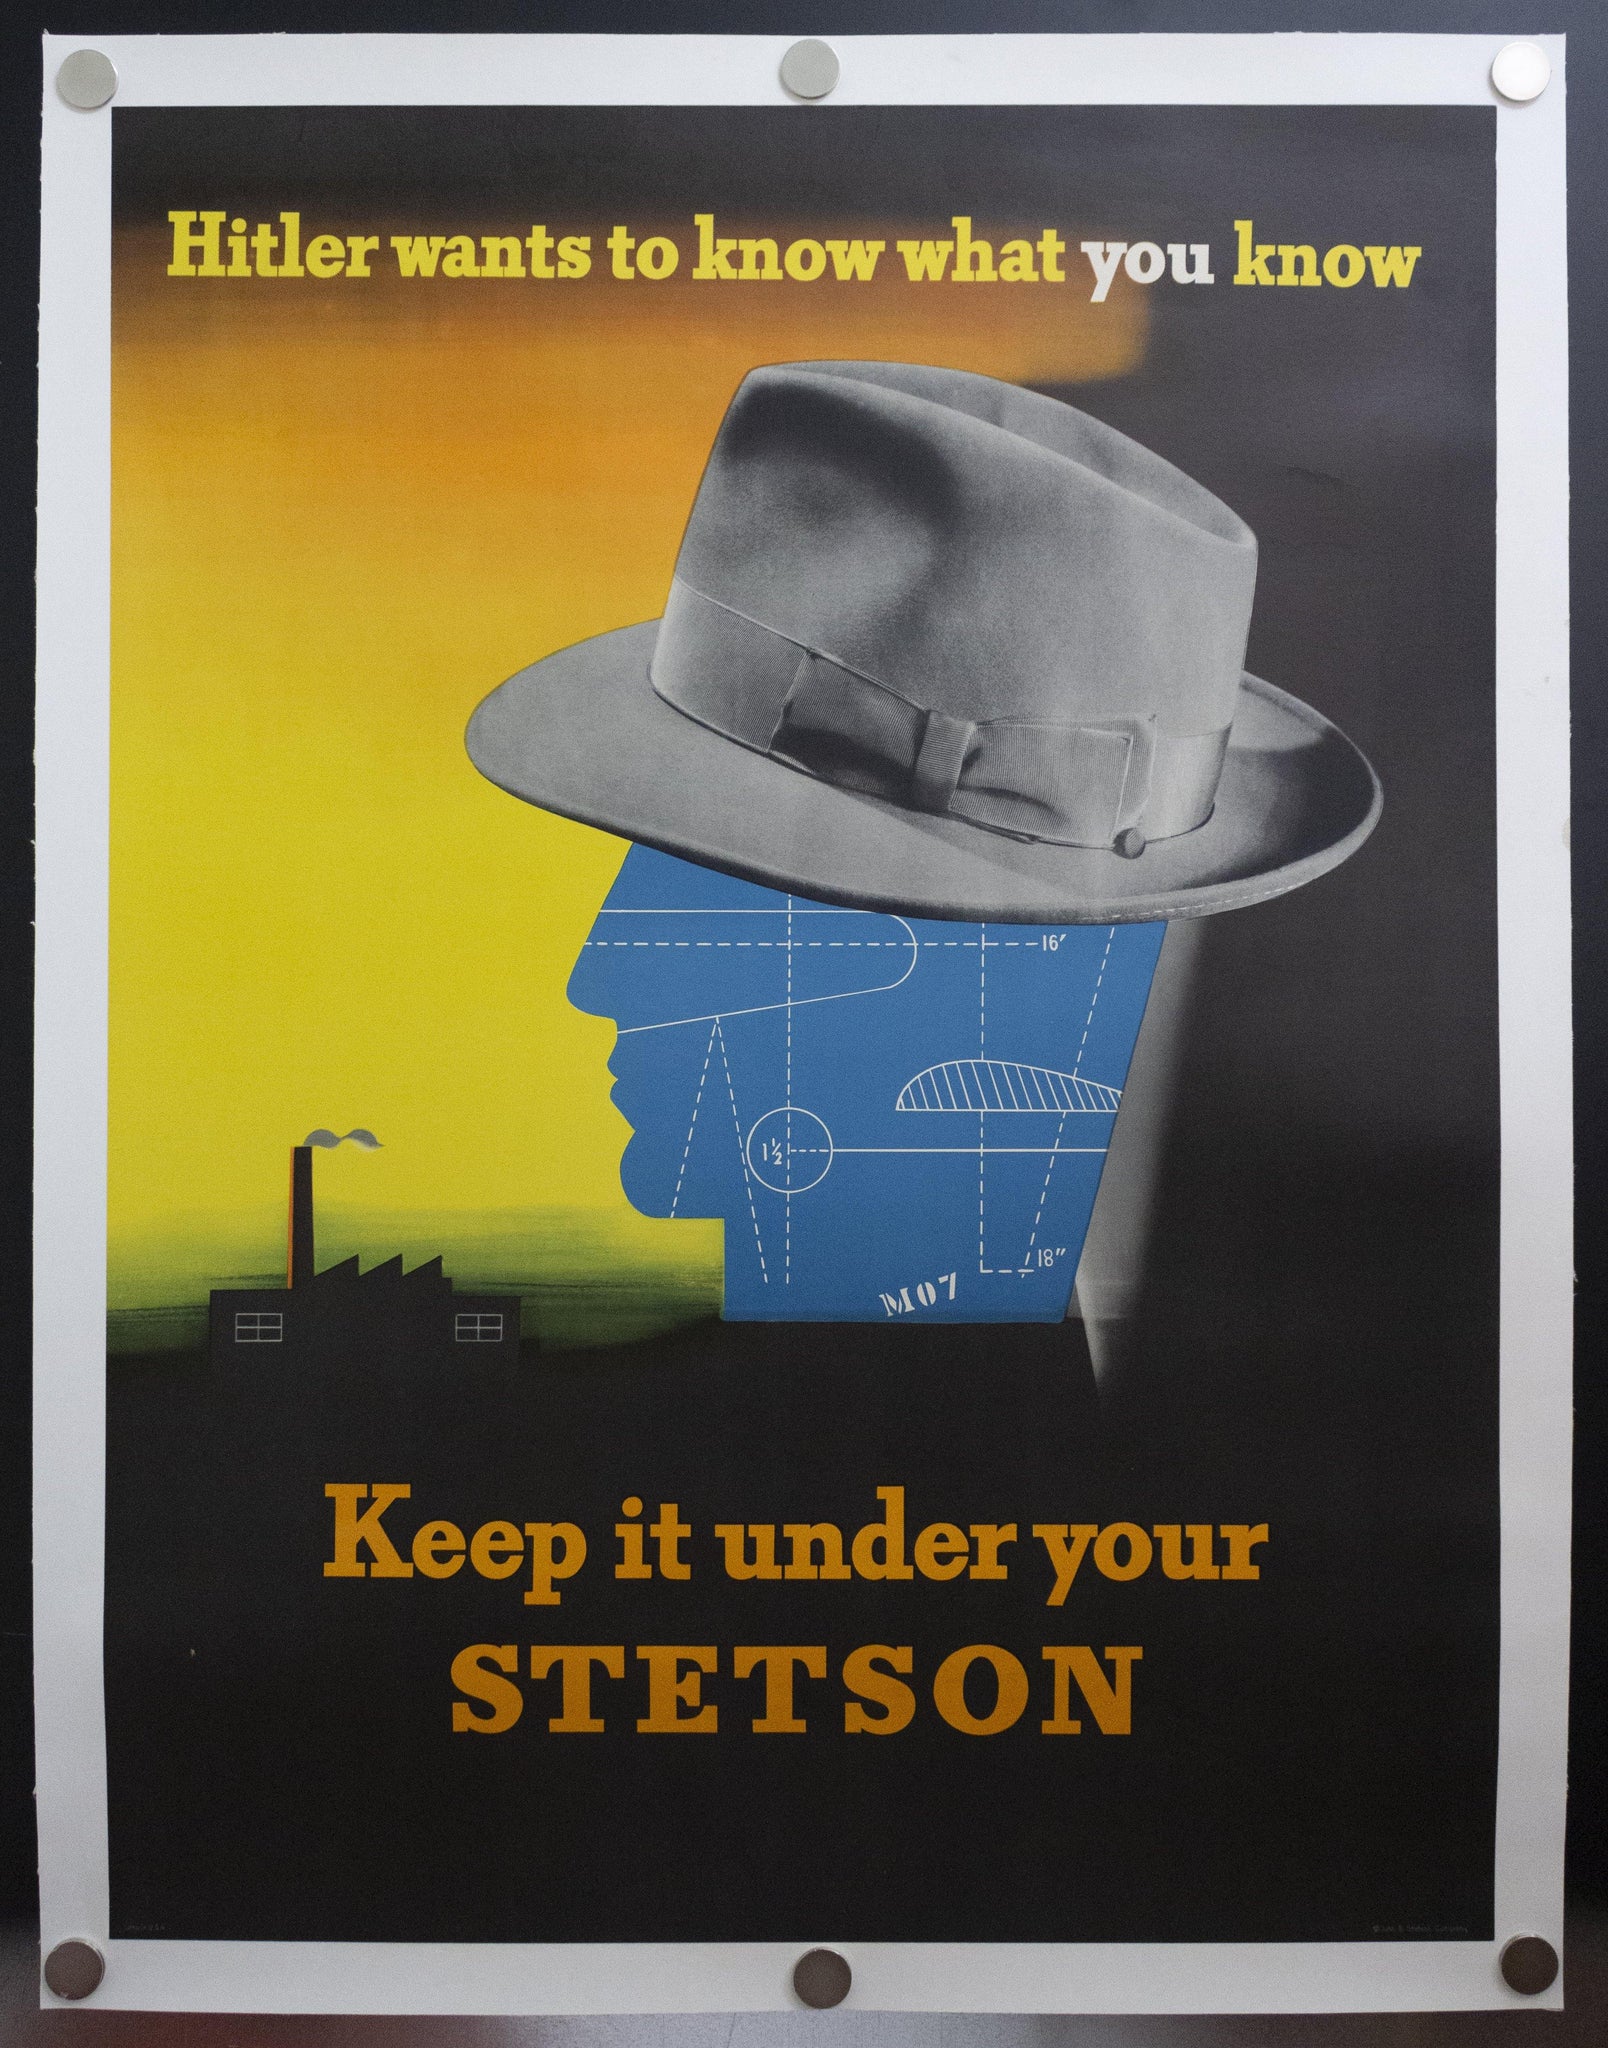 1942 Keep It Under Your Stetson by Edward McKnight Kauffer Hitler Wants To Know What You Know - Golden Age Posters